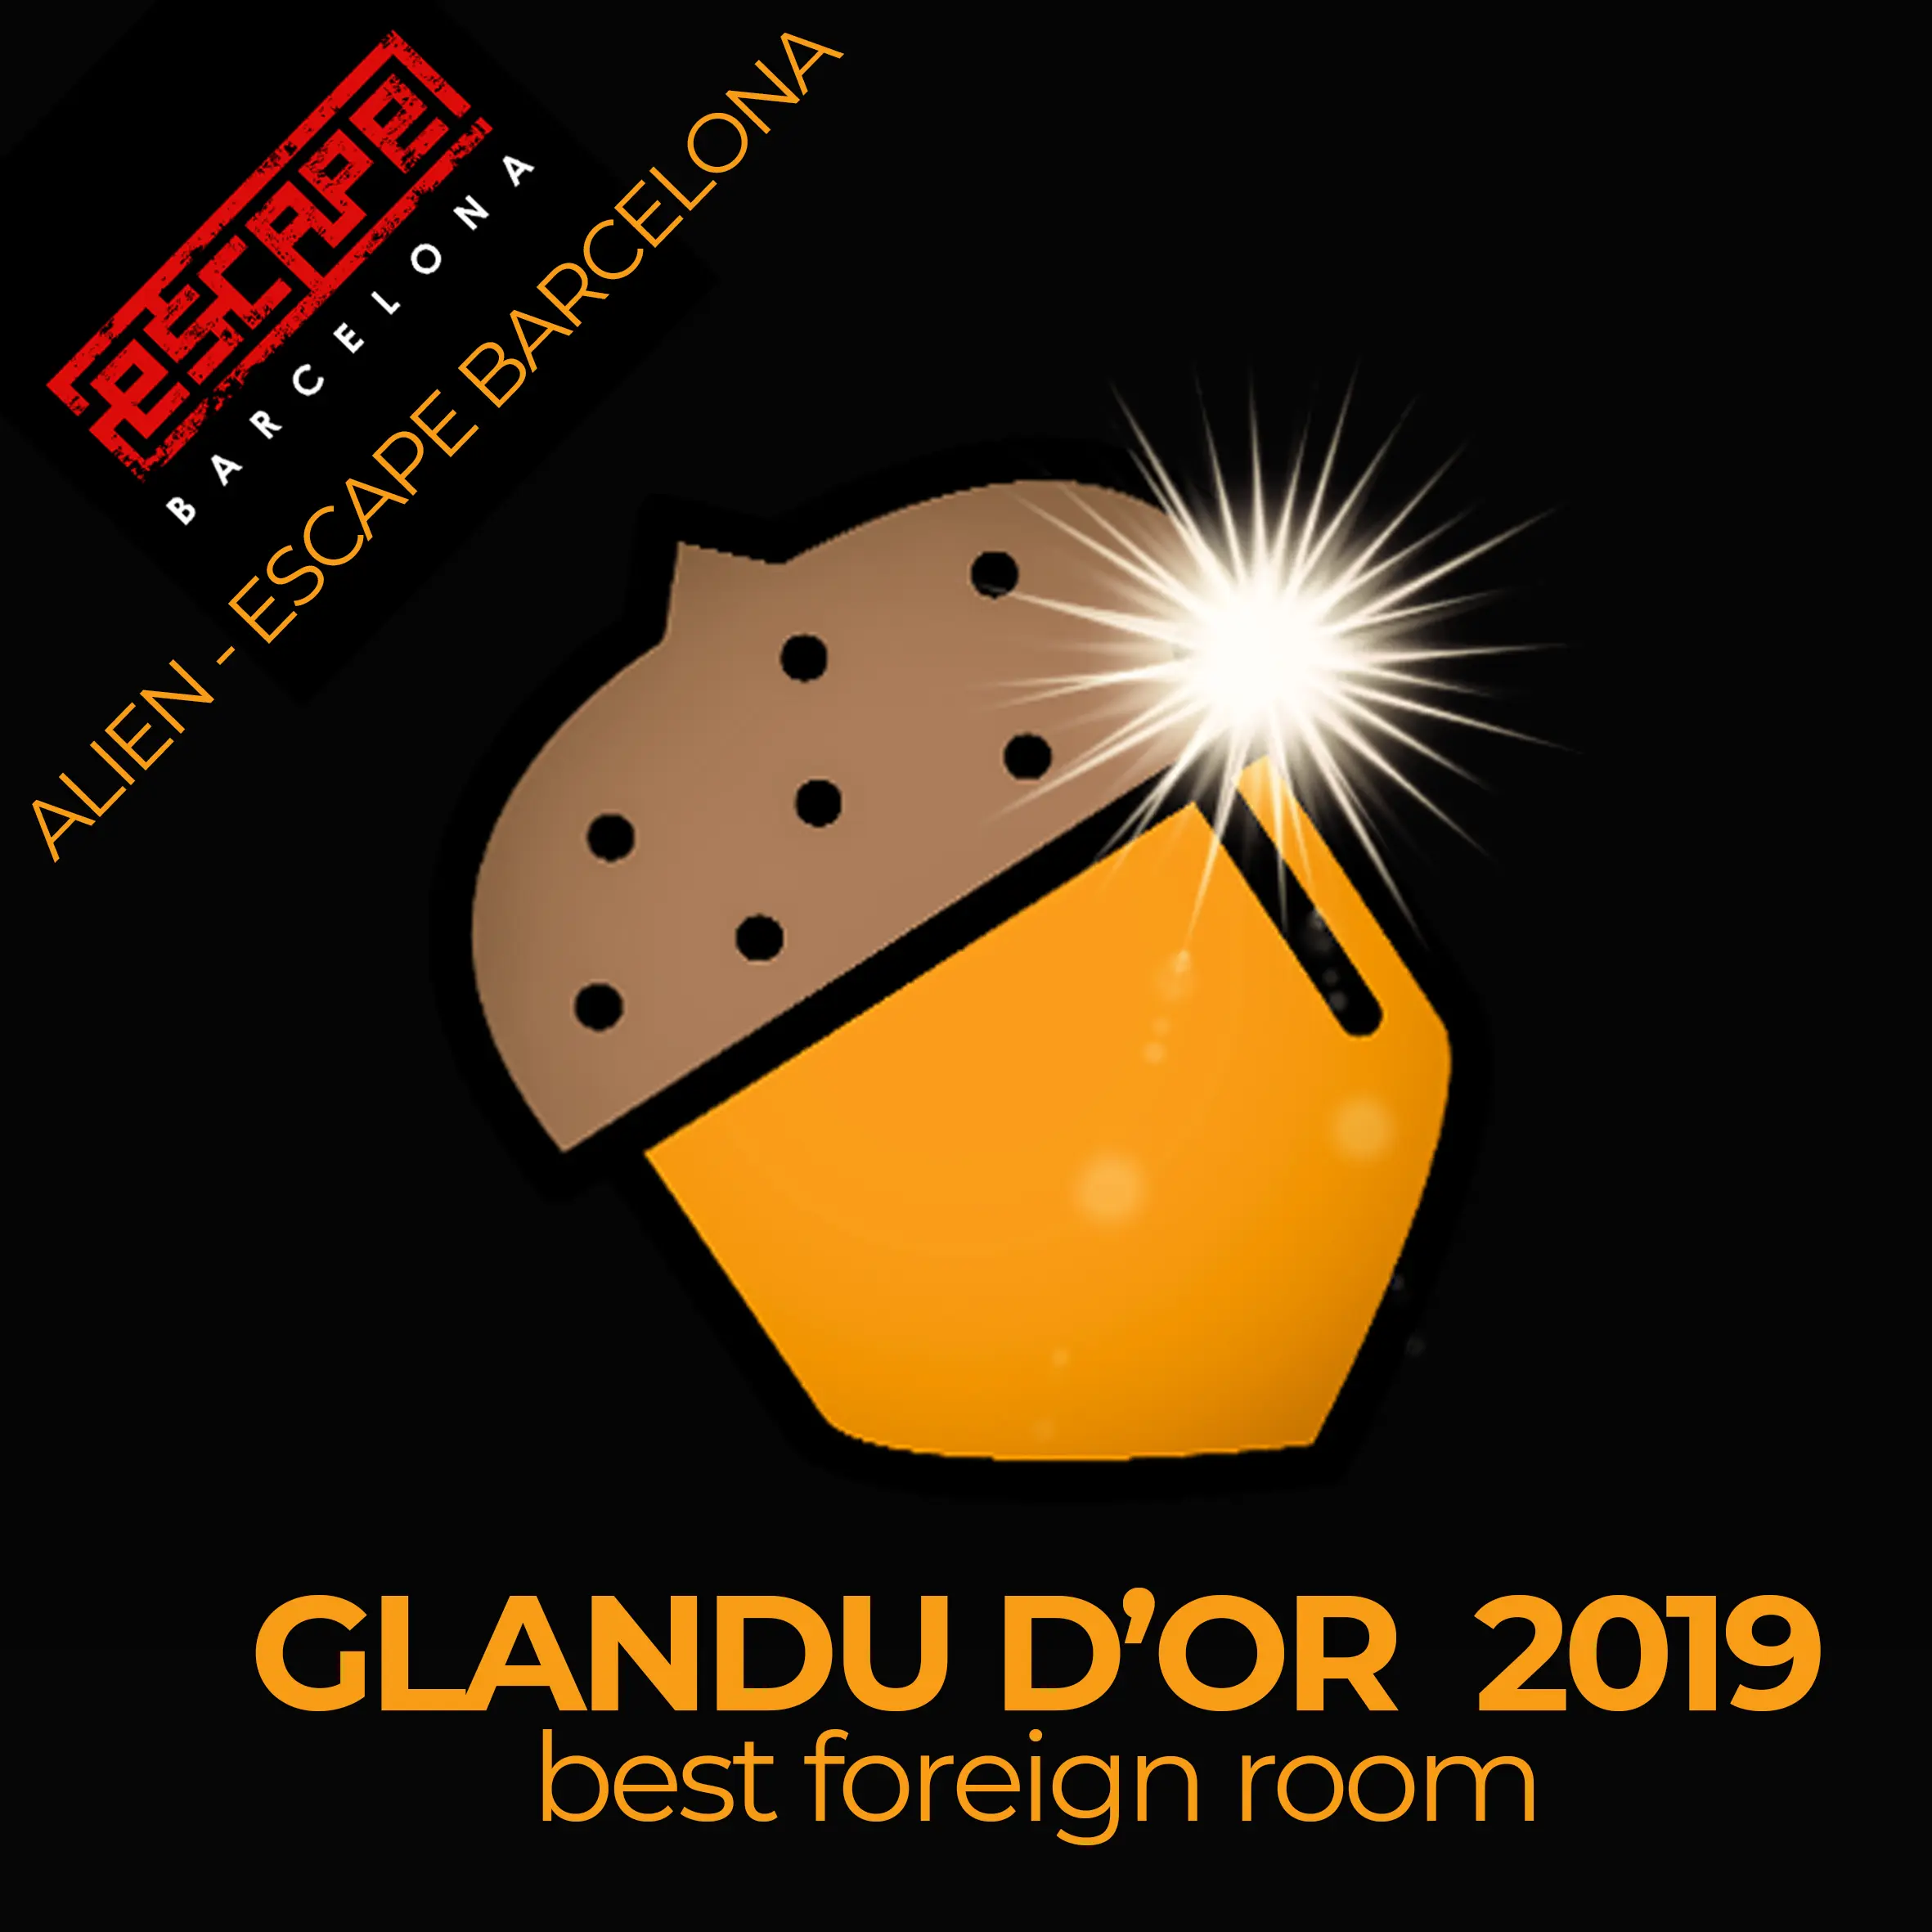 #1 BEST FOREIGN ESCAPE ROOM